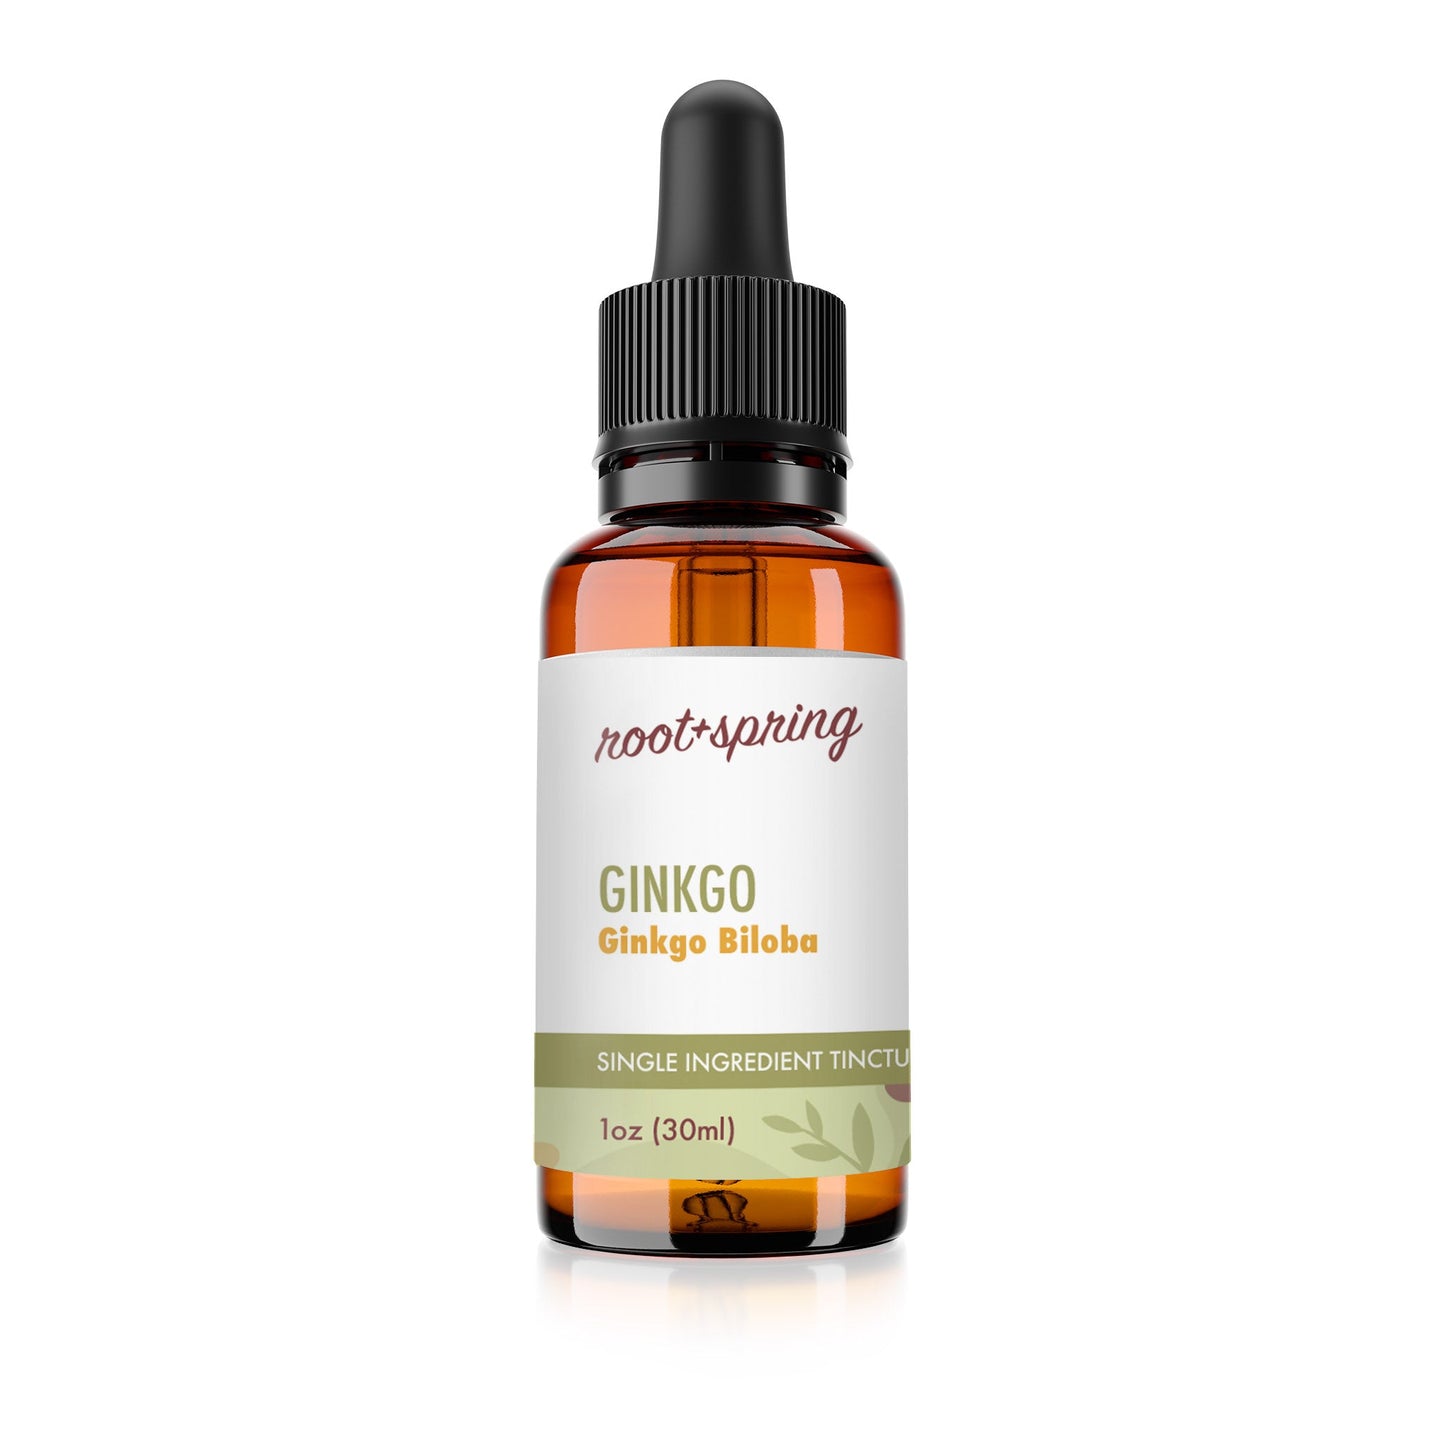 Bottle of Ginkgo (Ginkgo Biloba) - Herbal Tincture by root + spring